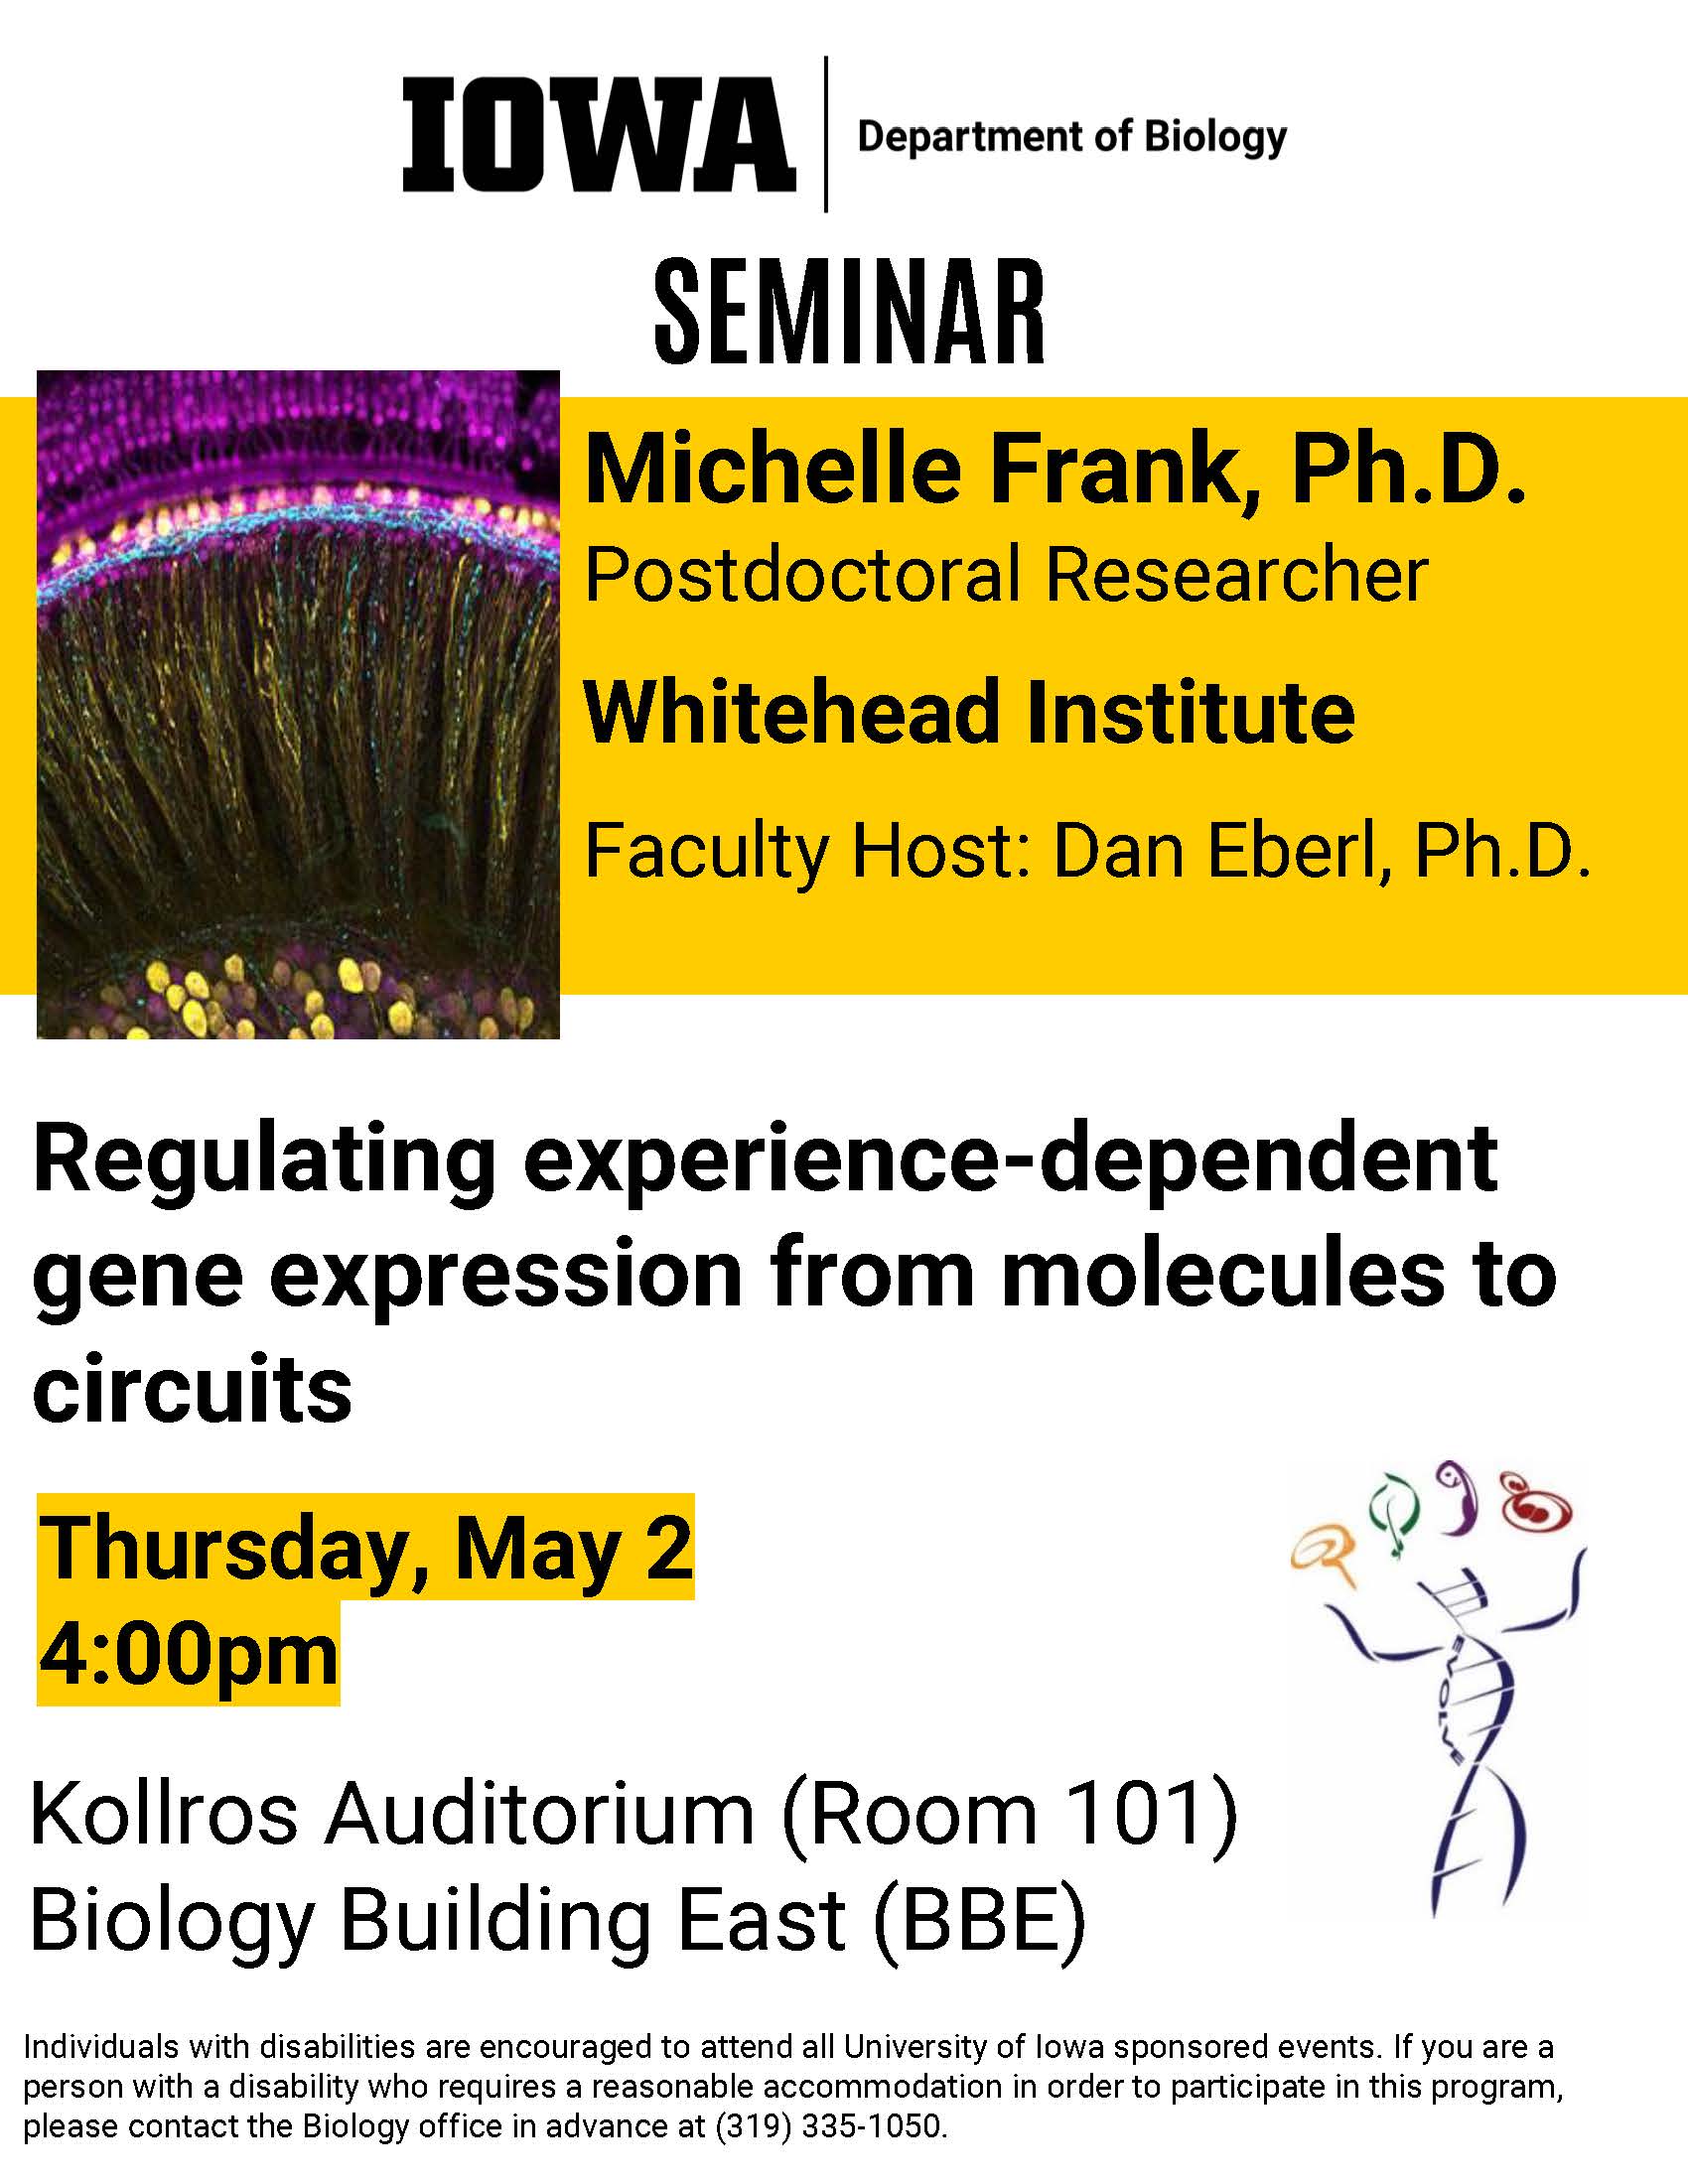 Biology seminar by Michelle Frank, Postdoctoral Researcher at Whitehead Institute, on Thursday, May 2 at 4pm in Kollros Auditorium (Room 101), Biology Building East. 